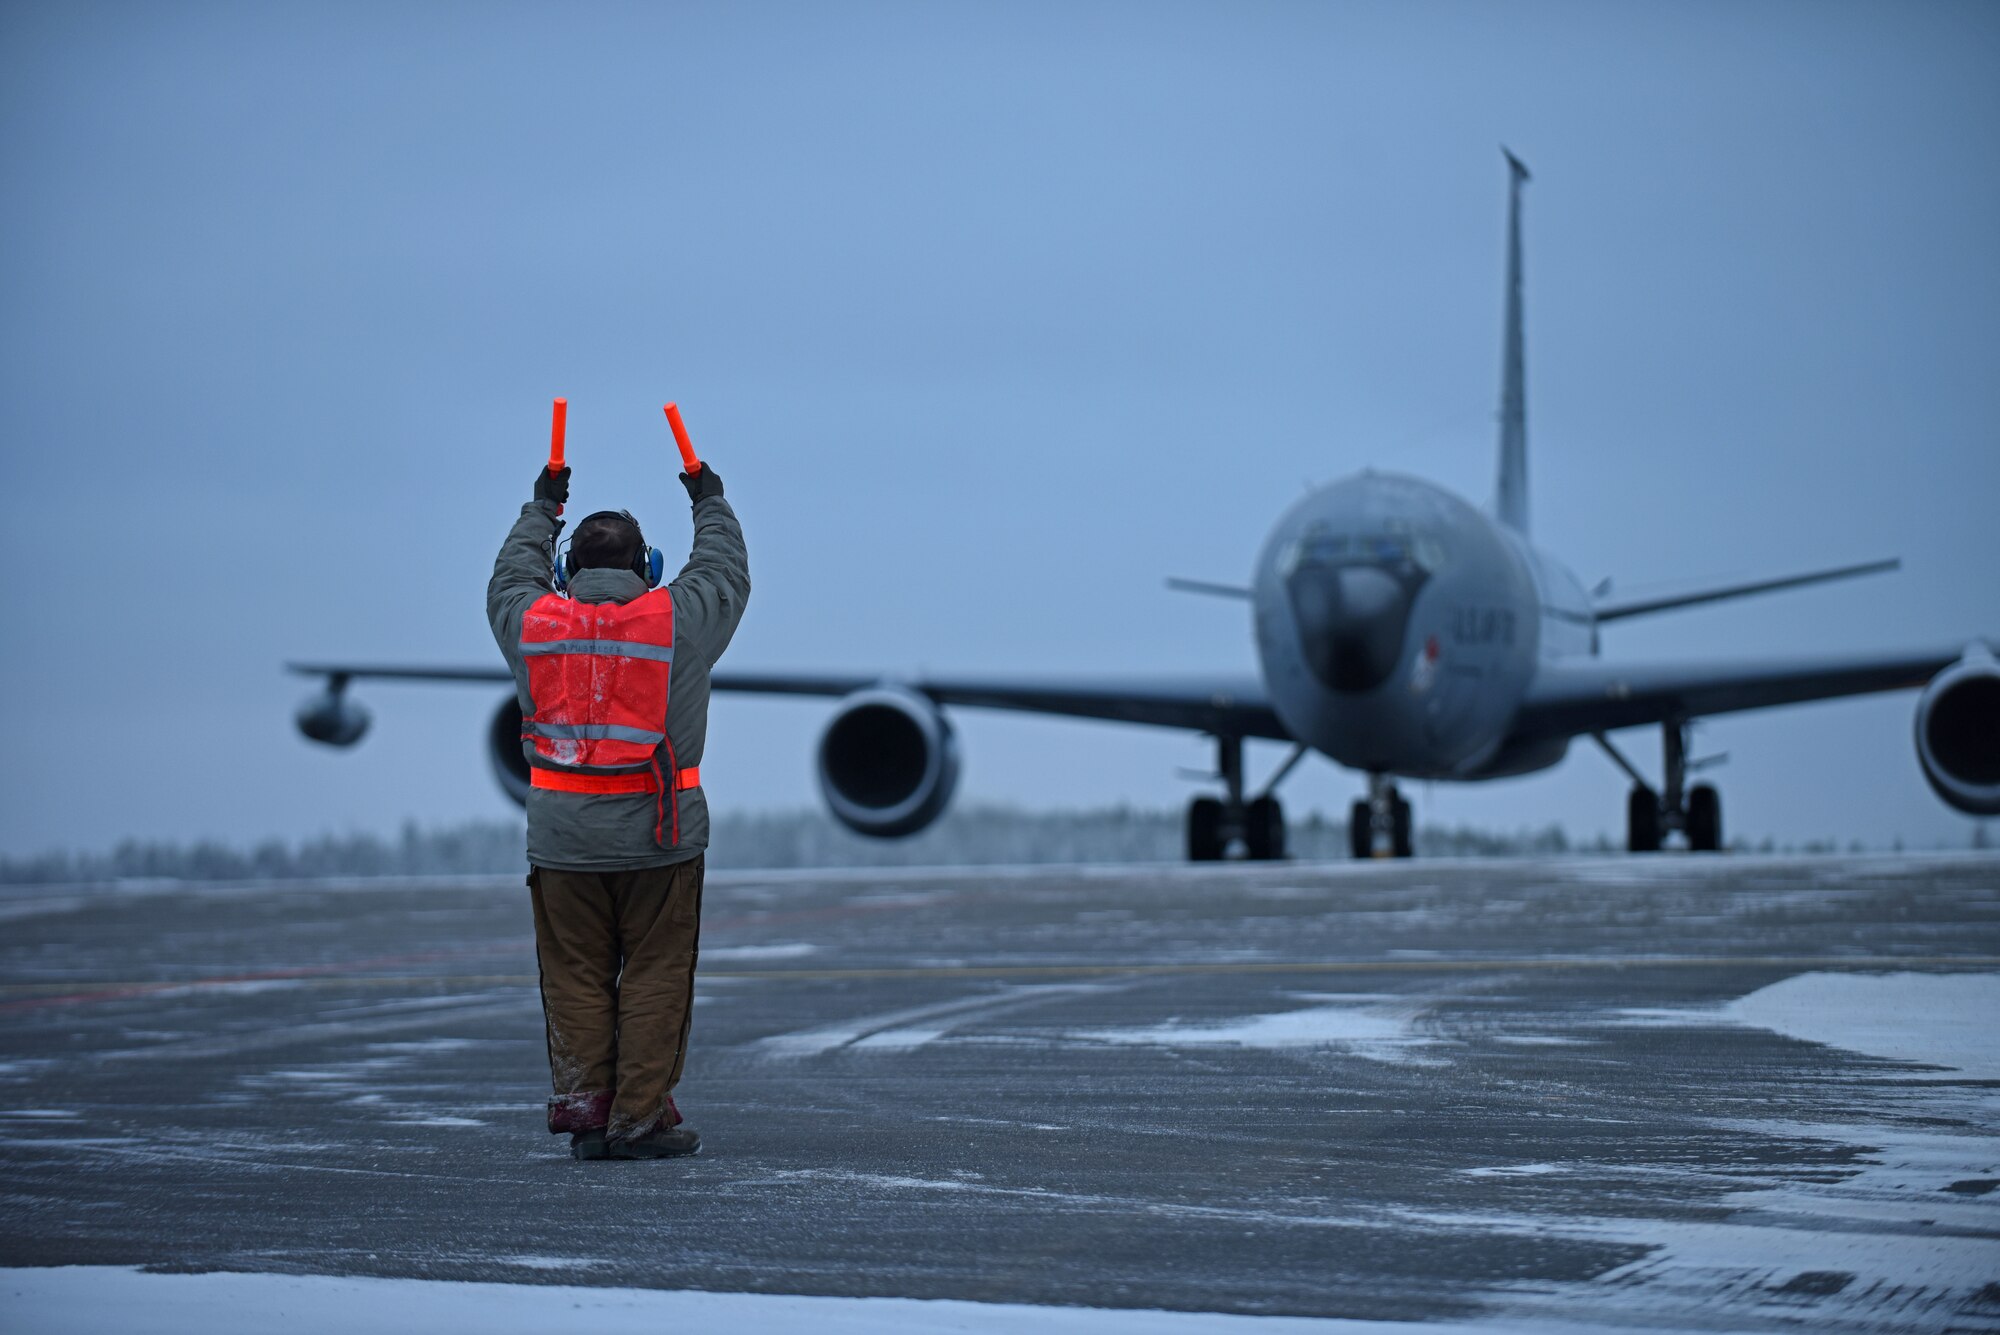 U.S. Air Force Senior Airman Nicholas Vidmar, 100th Aircraft Maintenance Squadron crew chief, marshals a U.S. Air Force KC-135 Stratotanker before takeoff to conduct aerial refueling training during Exercise Trident Juncture 18, at Rovaniemi, Finland, Oct. 27, 2018. Trident Juncture is the largest NATO exercise since 2015, with more than 50,000 military members from 31 nations. The U.S. military makes up approximately a quarter of the participating personnel. (U.S. Air Force photo by Senior Airman Luke Milano)